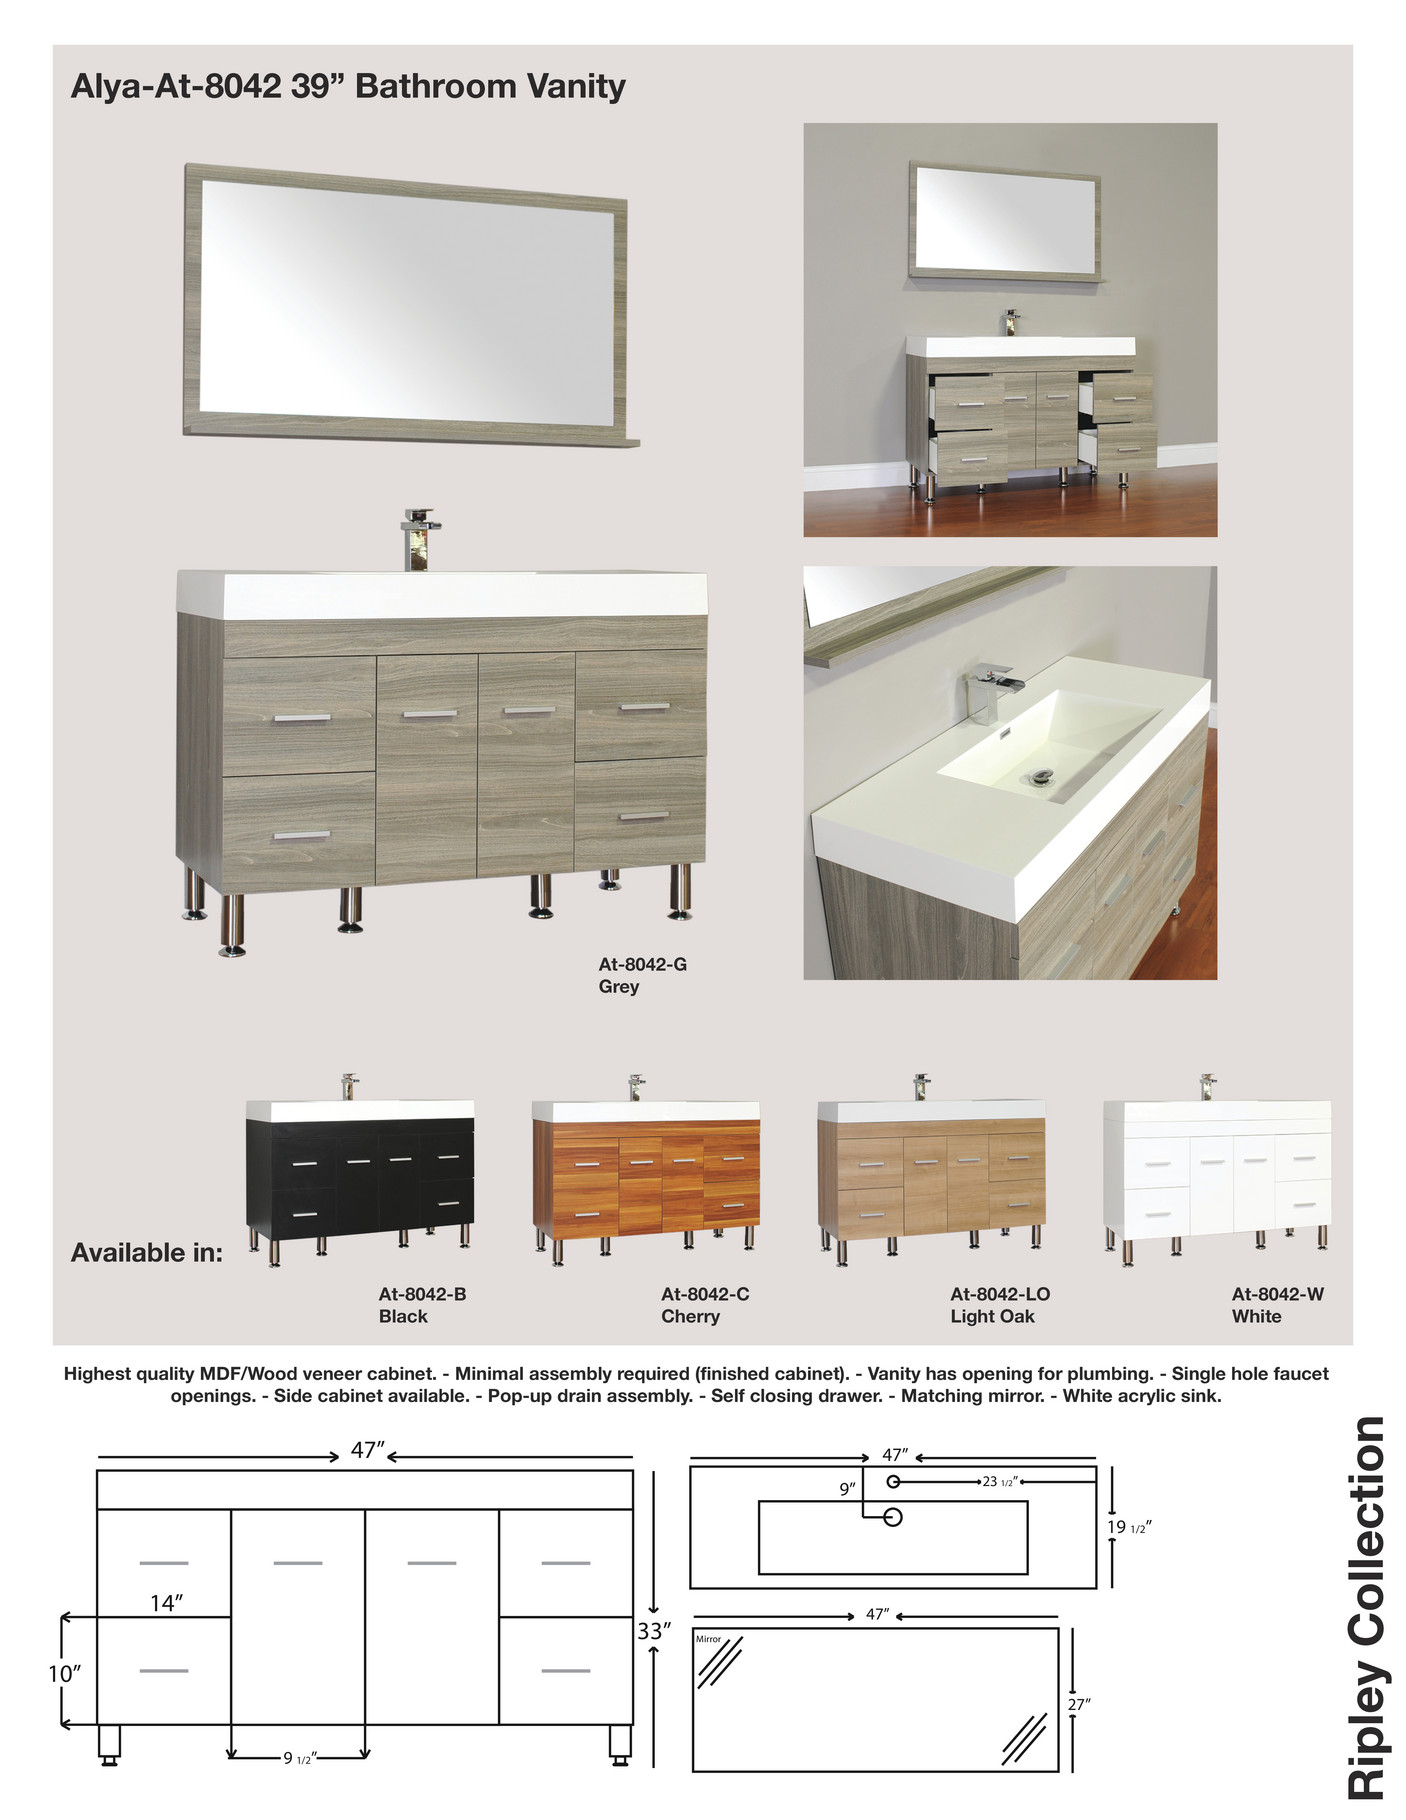 Home Design Outlet Center Ripley Collection Bathroom Vanities Alya Bath At 8043 Lo 56double Modern Bathroom Vanity Light Oak Created With Publitascom